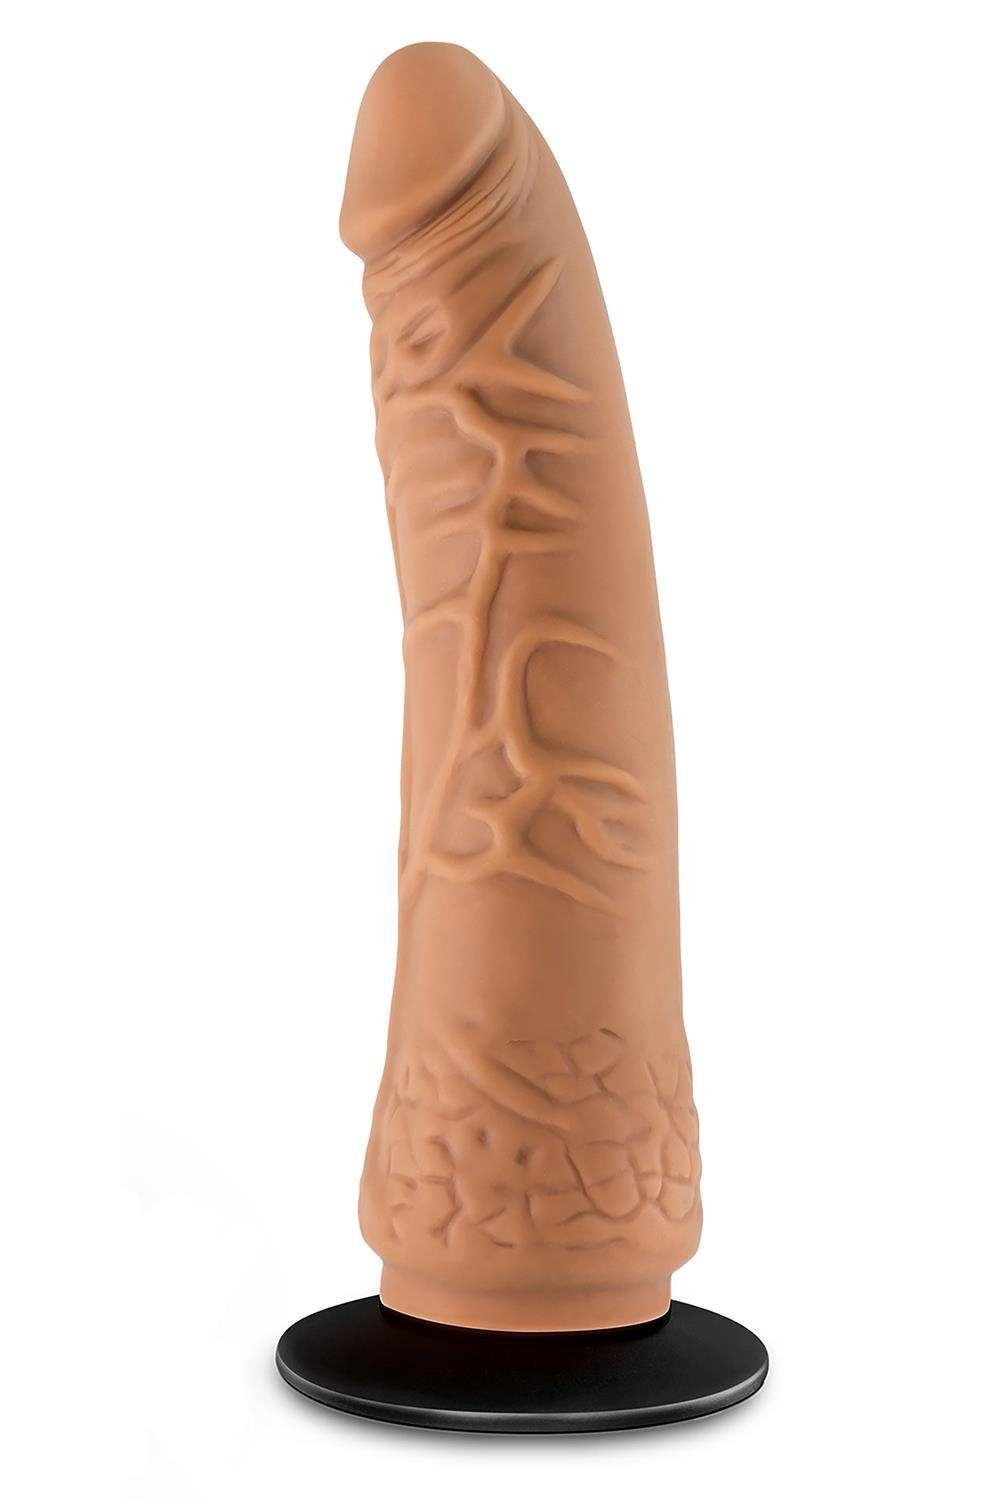 7.5 Dildo Blush Hexanite Lock With Mocha Inch Suction Dildo 19cm Adapter Cup On